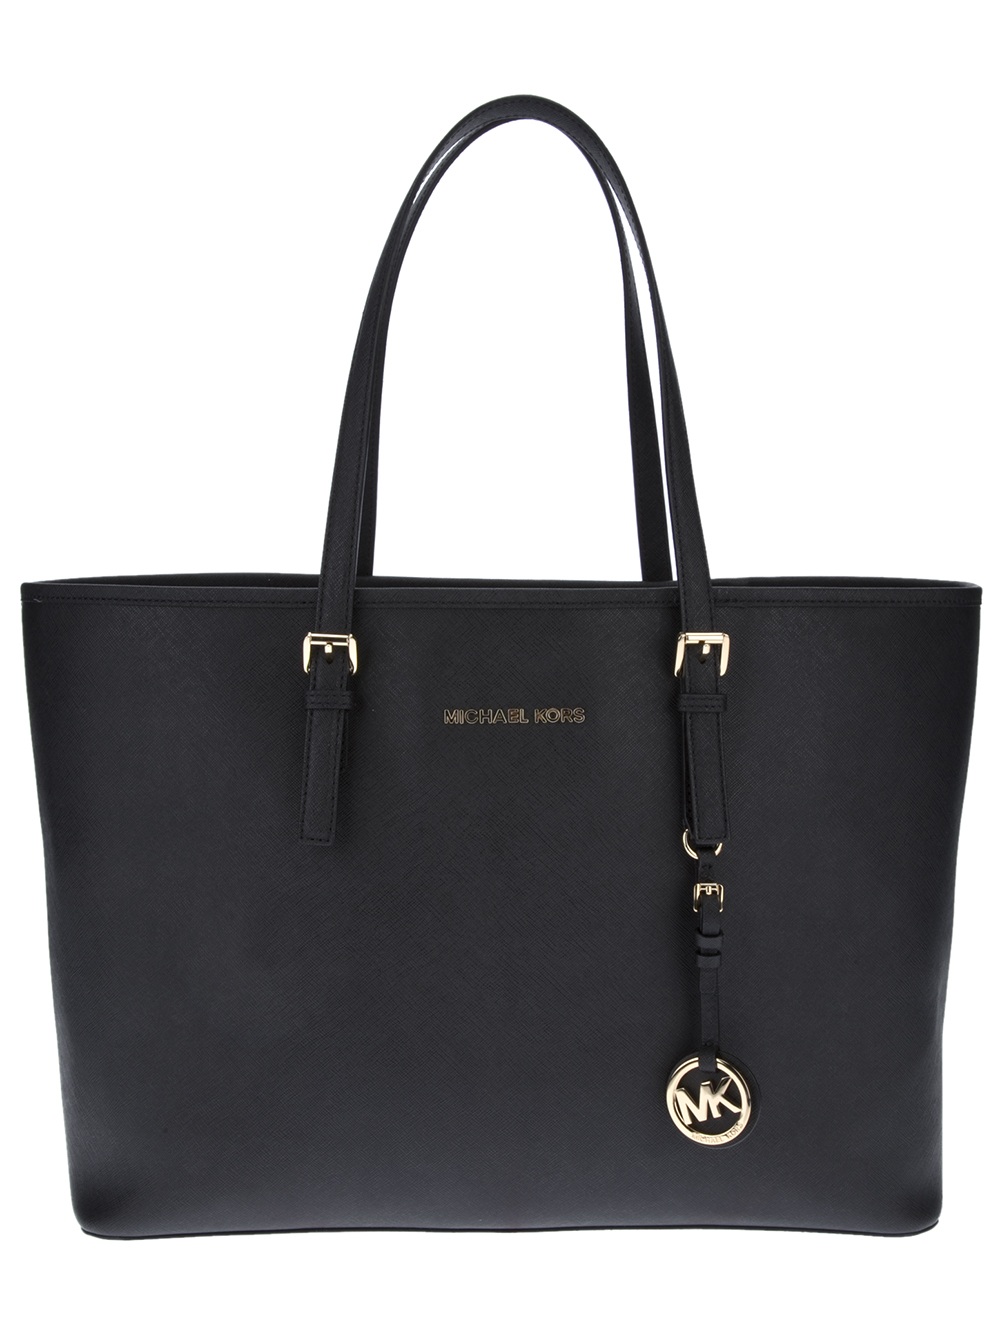 Michael kors Jet Set Travel Leather Tote in Black | Lyst